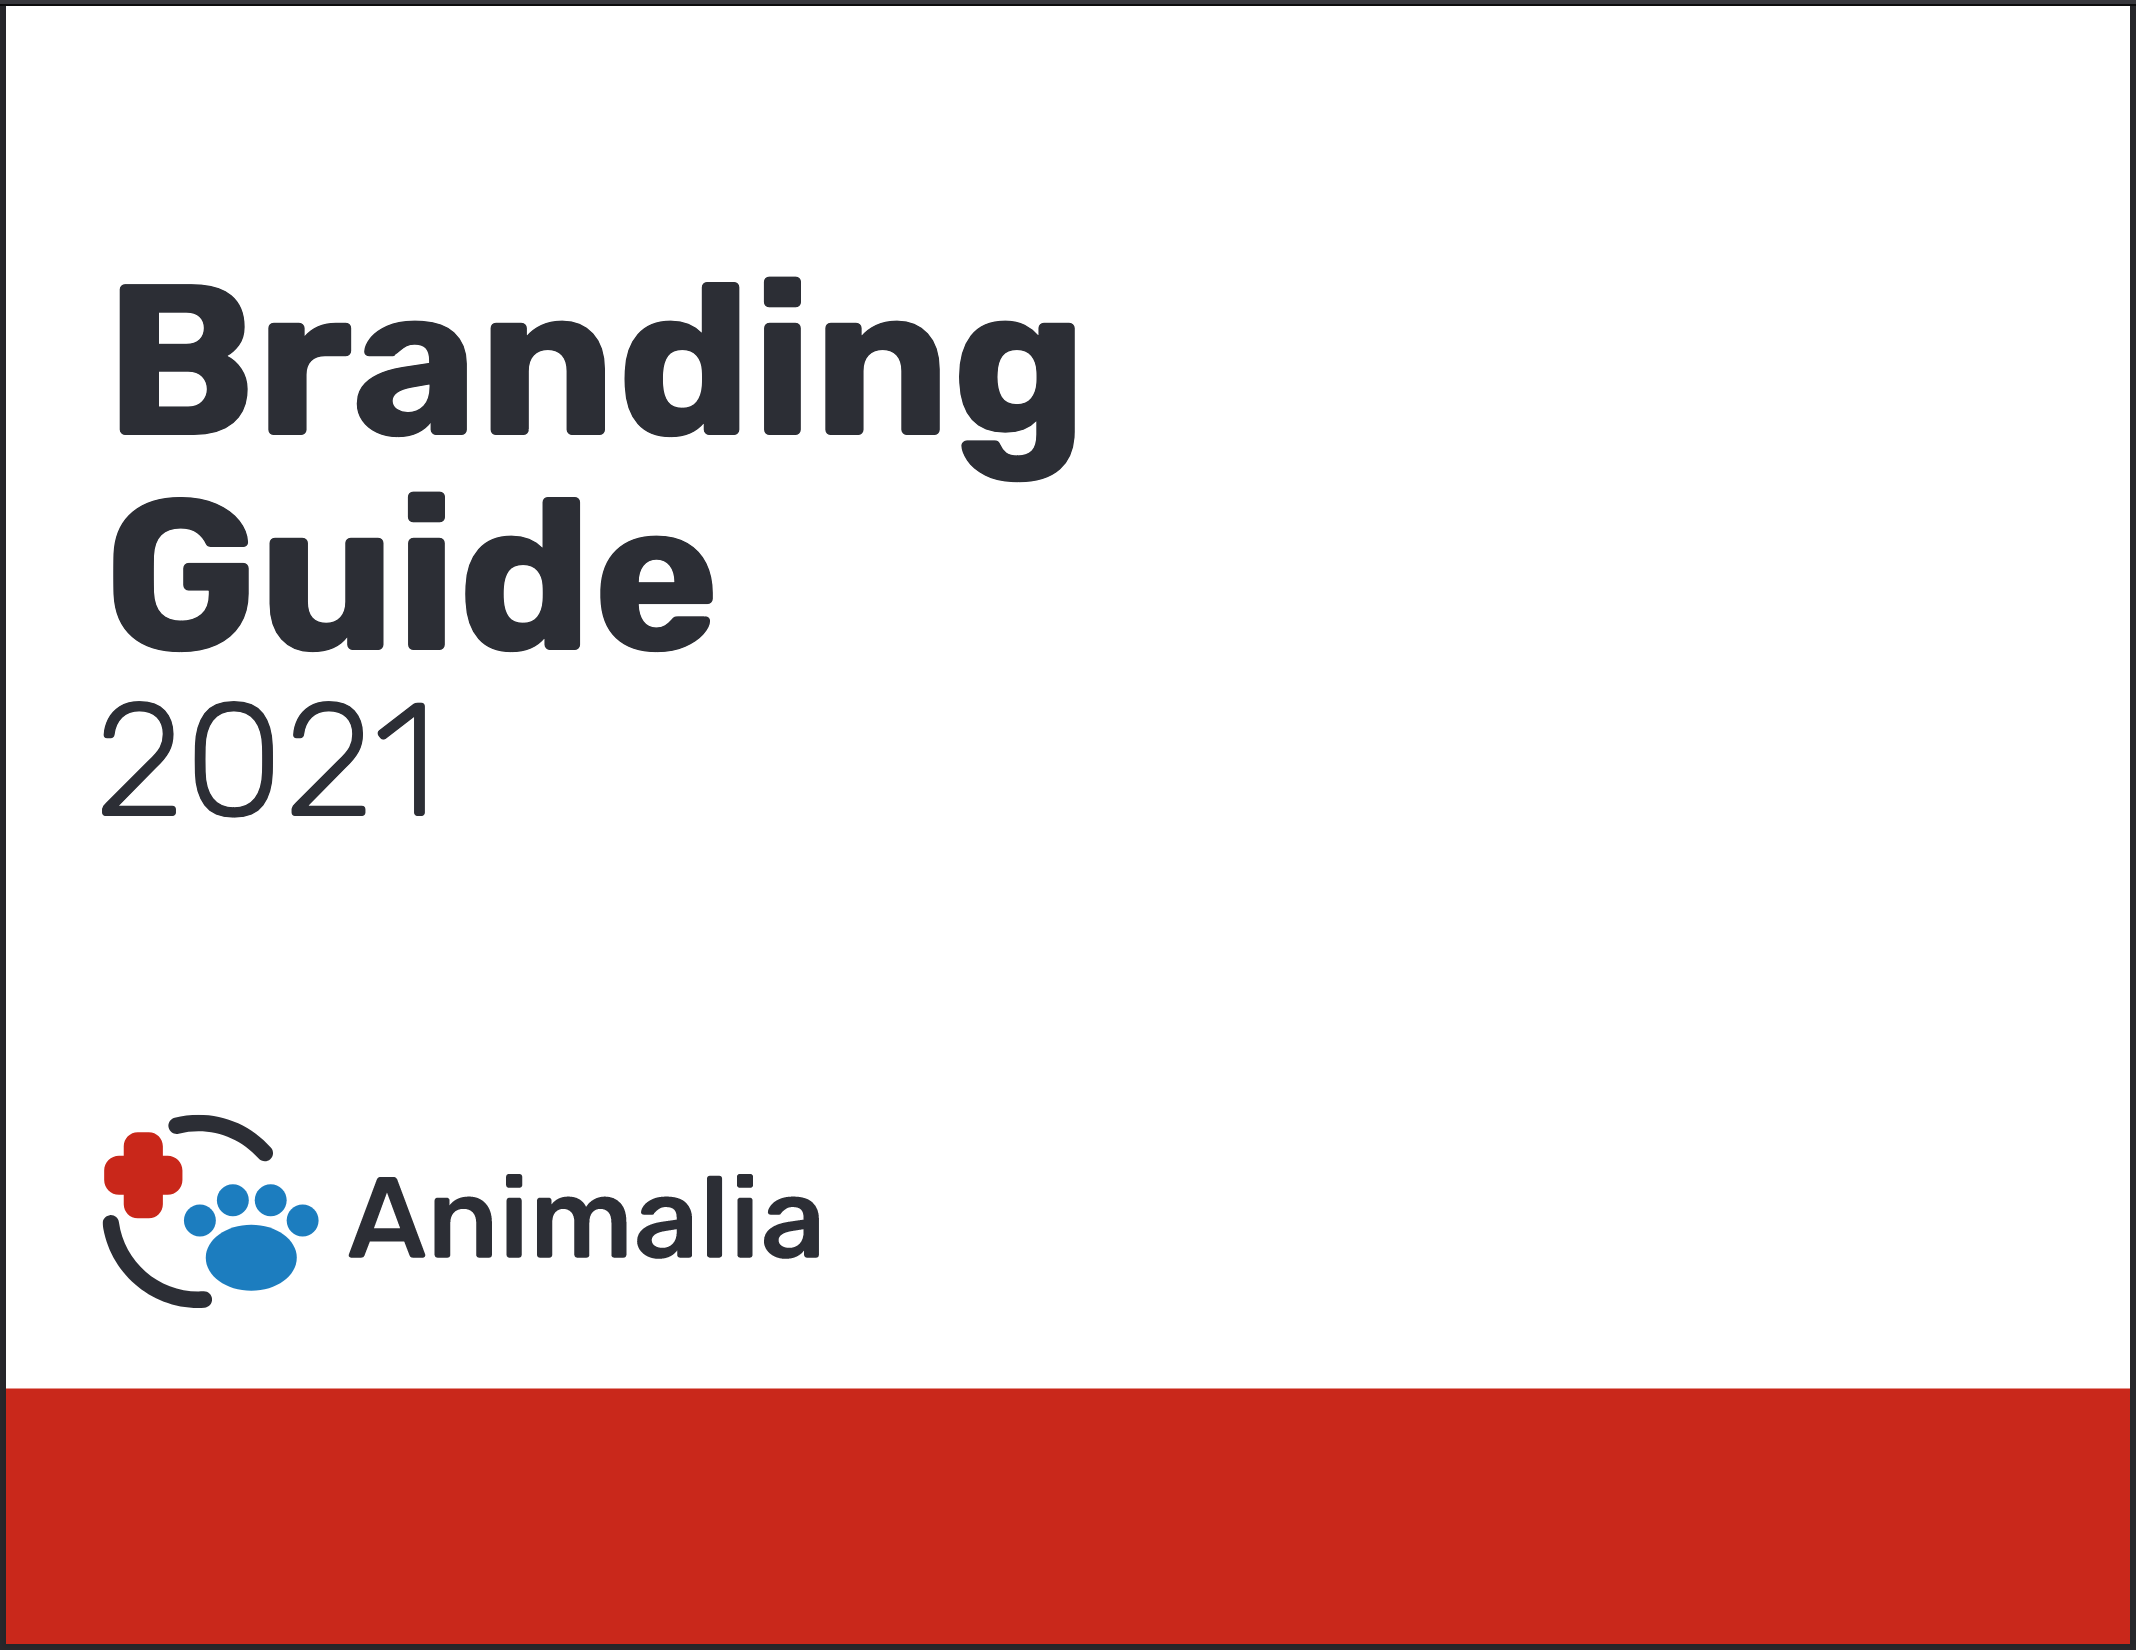 The title page of the pdf document listing the branding standards for the fictional veterinary telehealth service, Animalia.